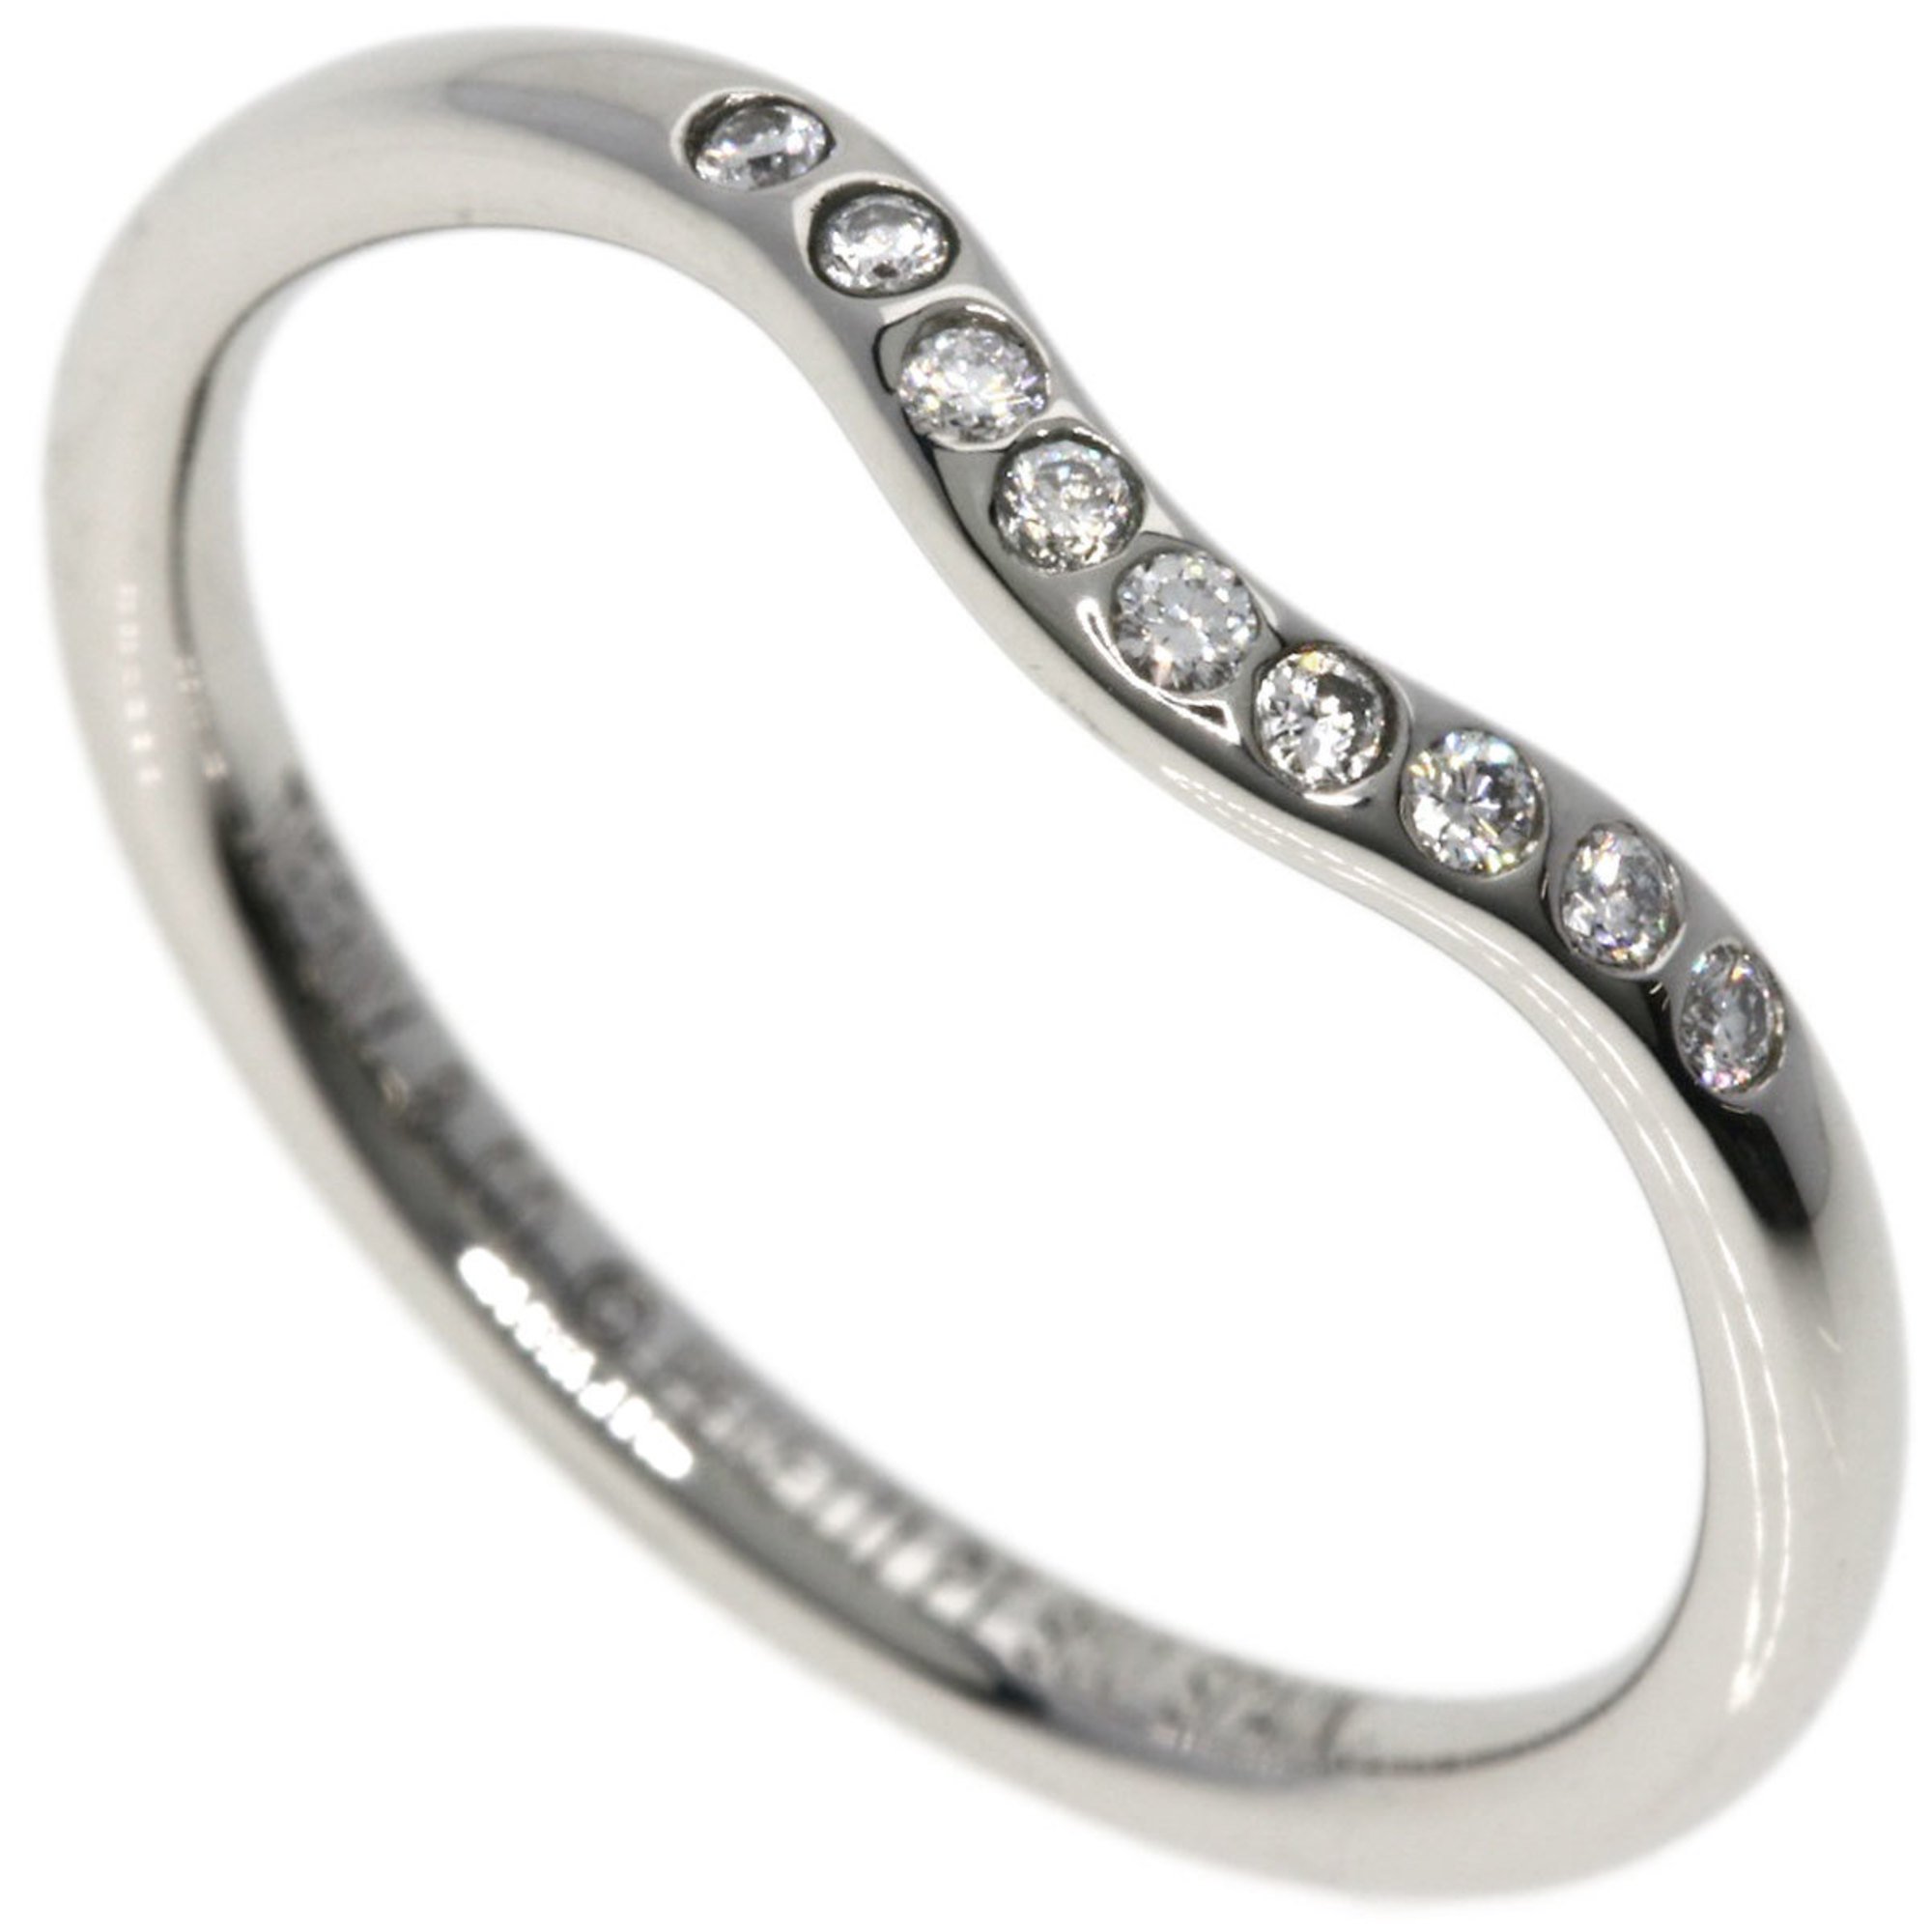 Tiffany curved band diamond ring, platinum PT950, for women